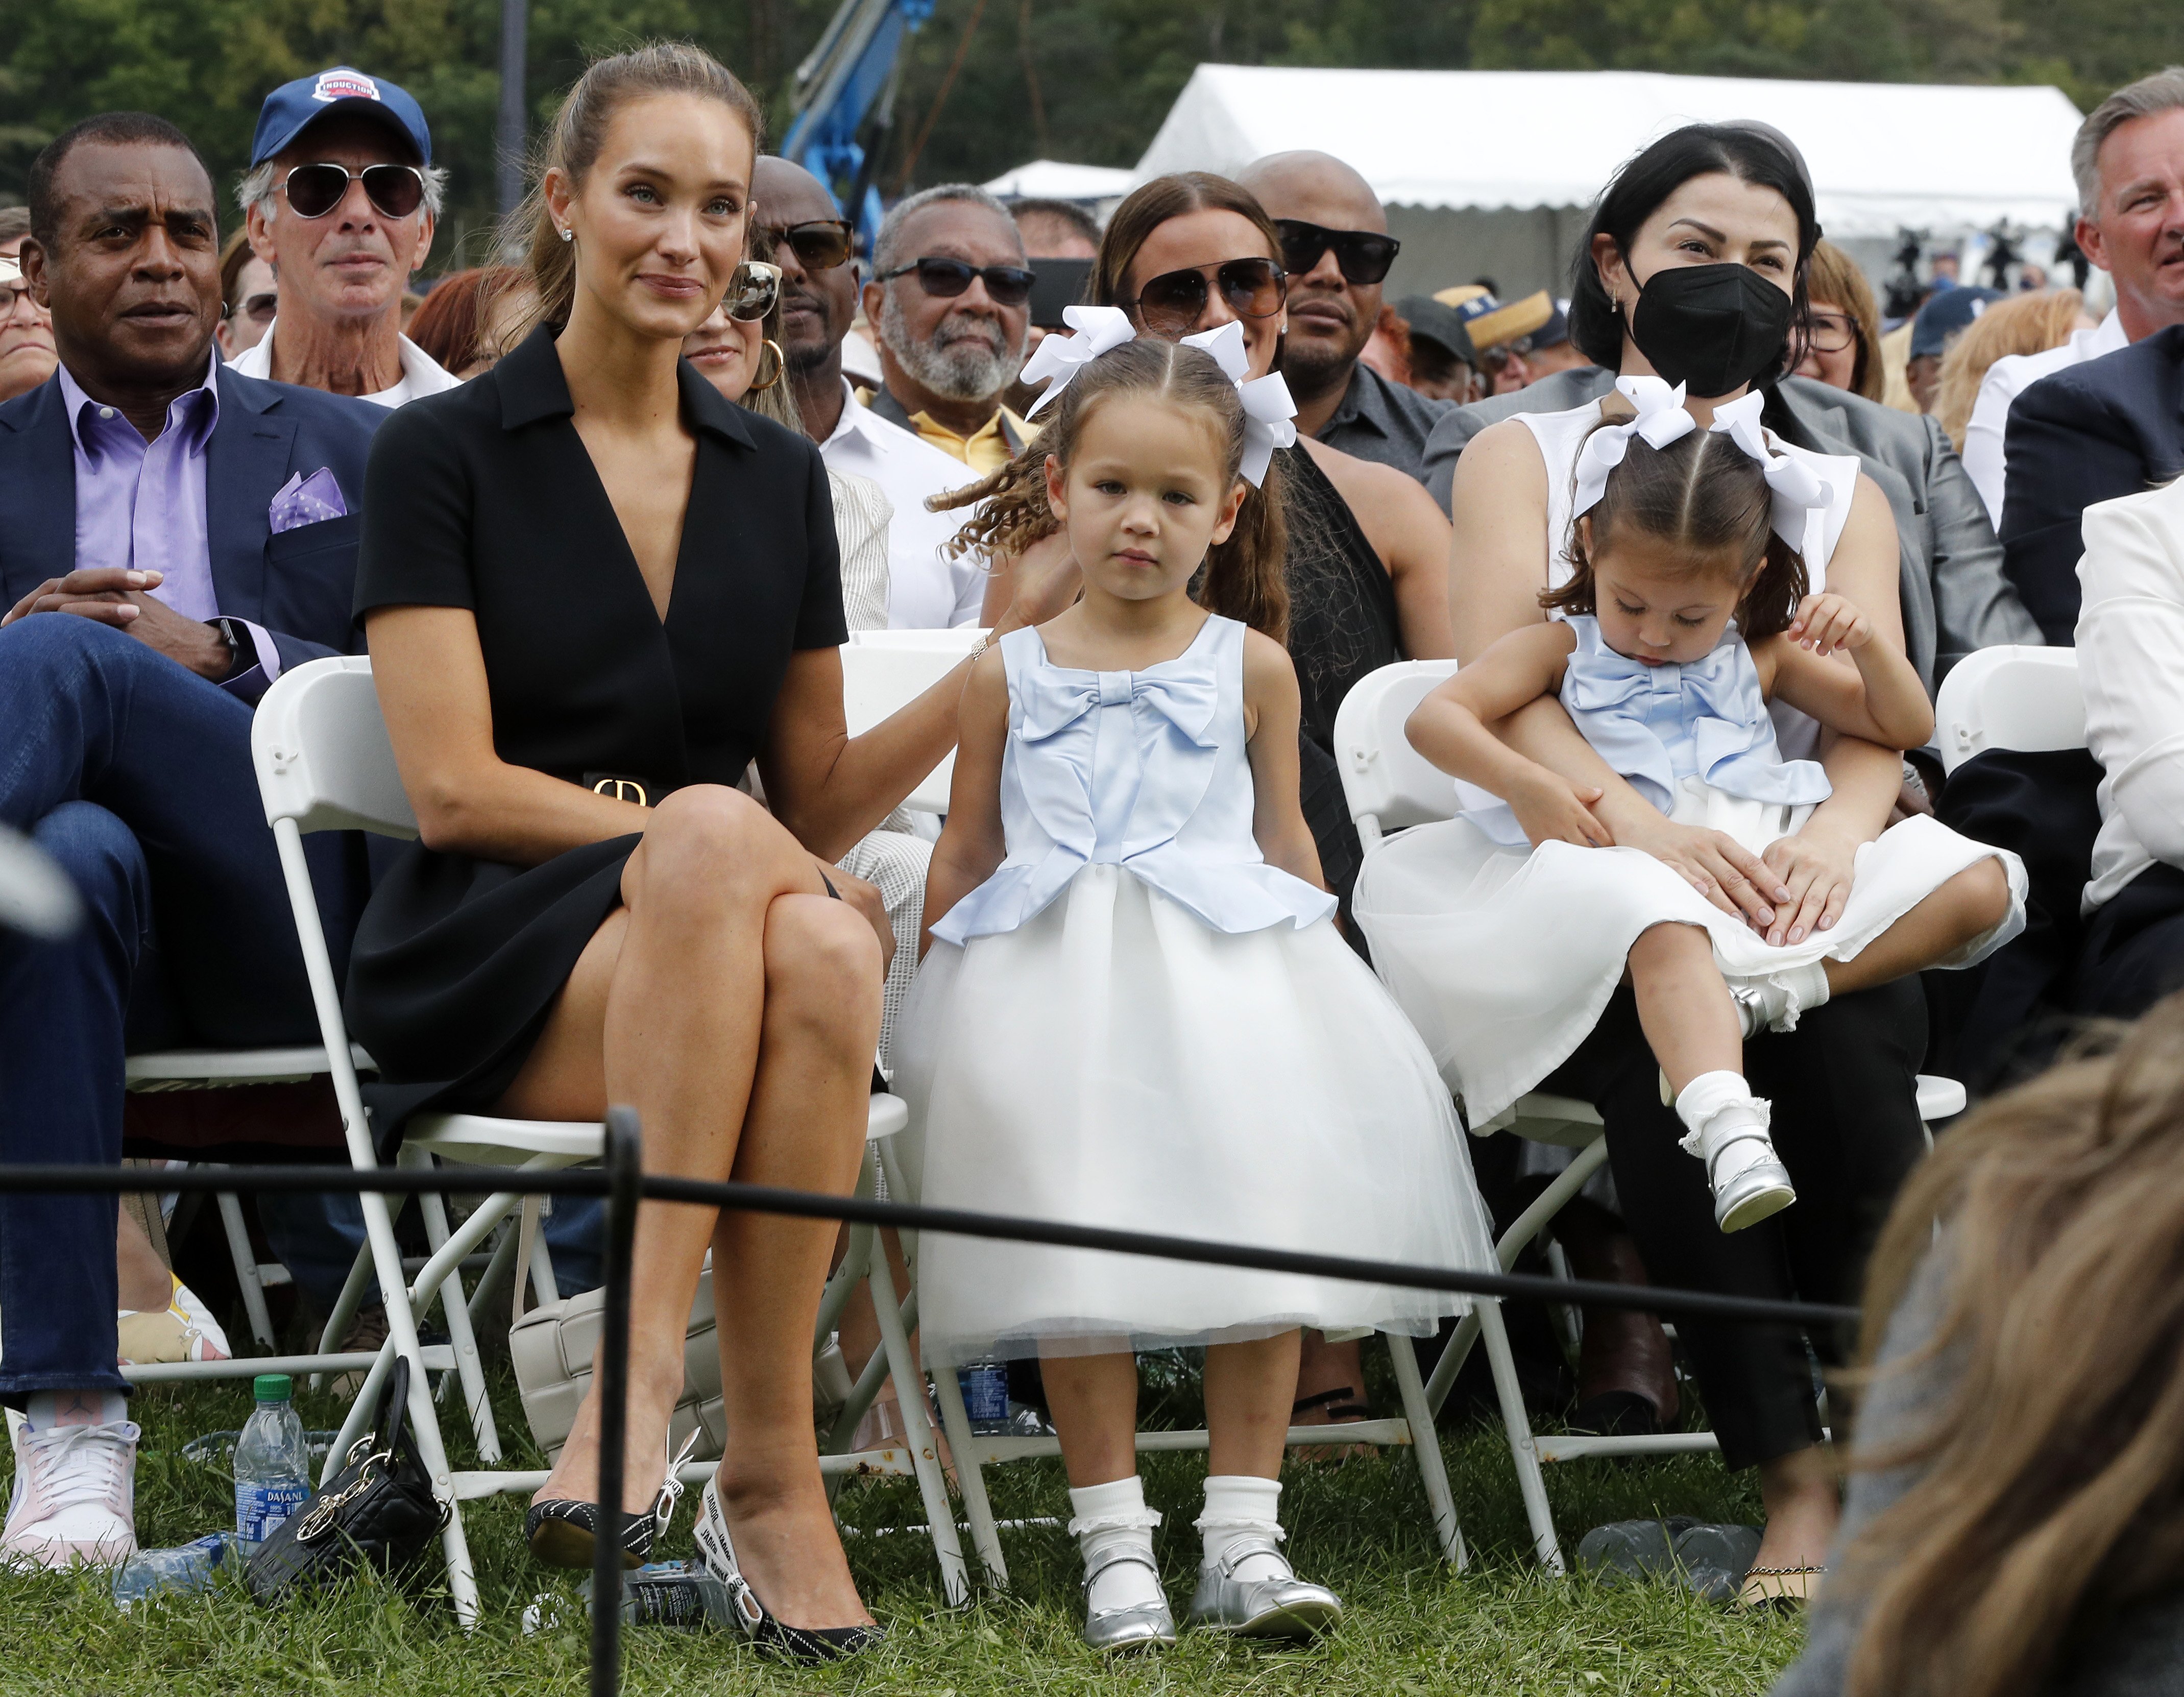 Hannah Jeter, wife of inductee Derek Jeter, attends the Baseball Hall of Fame induction ceremony with their children, Bella and Story, at Clark Sports Center on September 8, 2021, in Cooperstown, New York. | Source: Getty Images